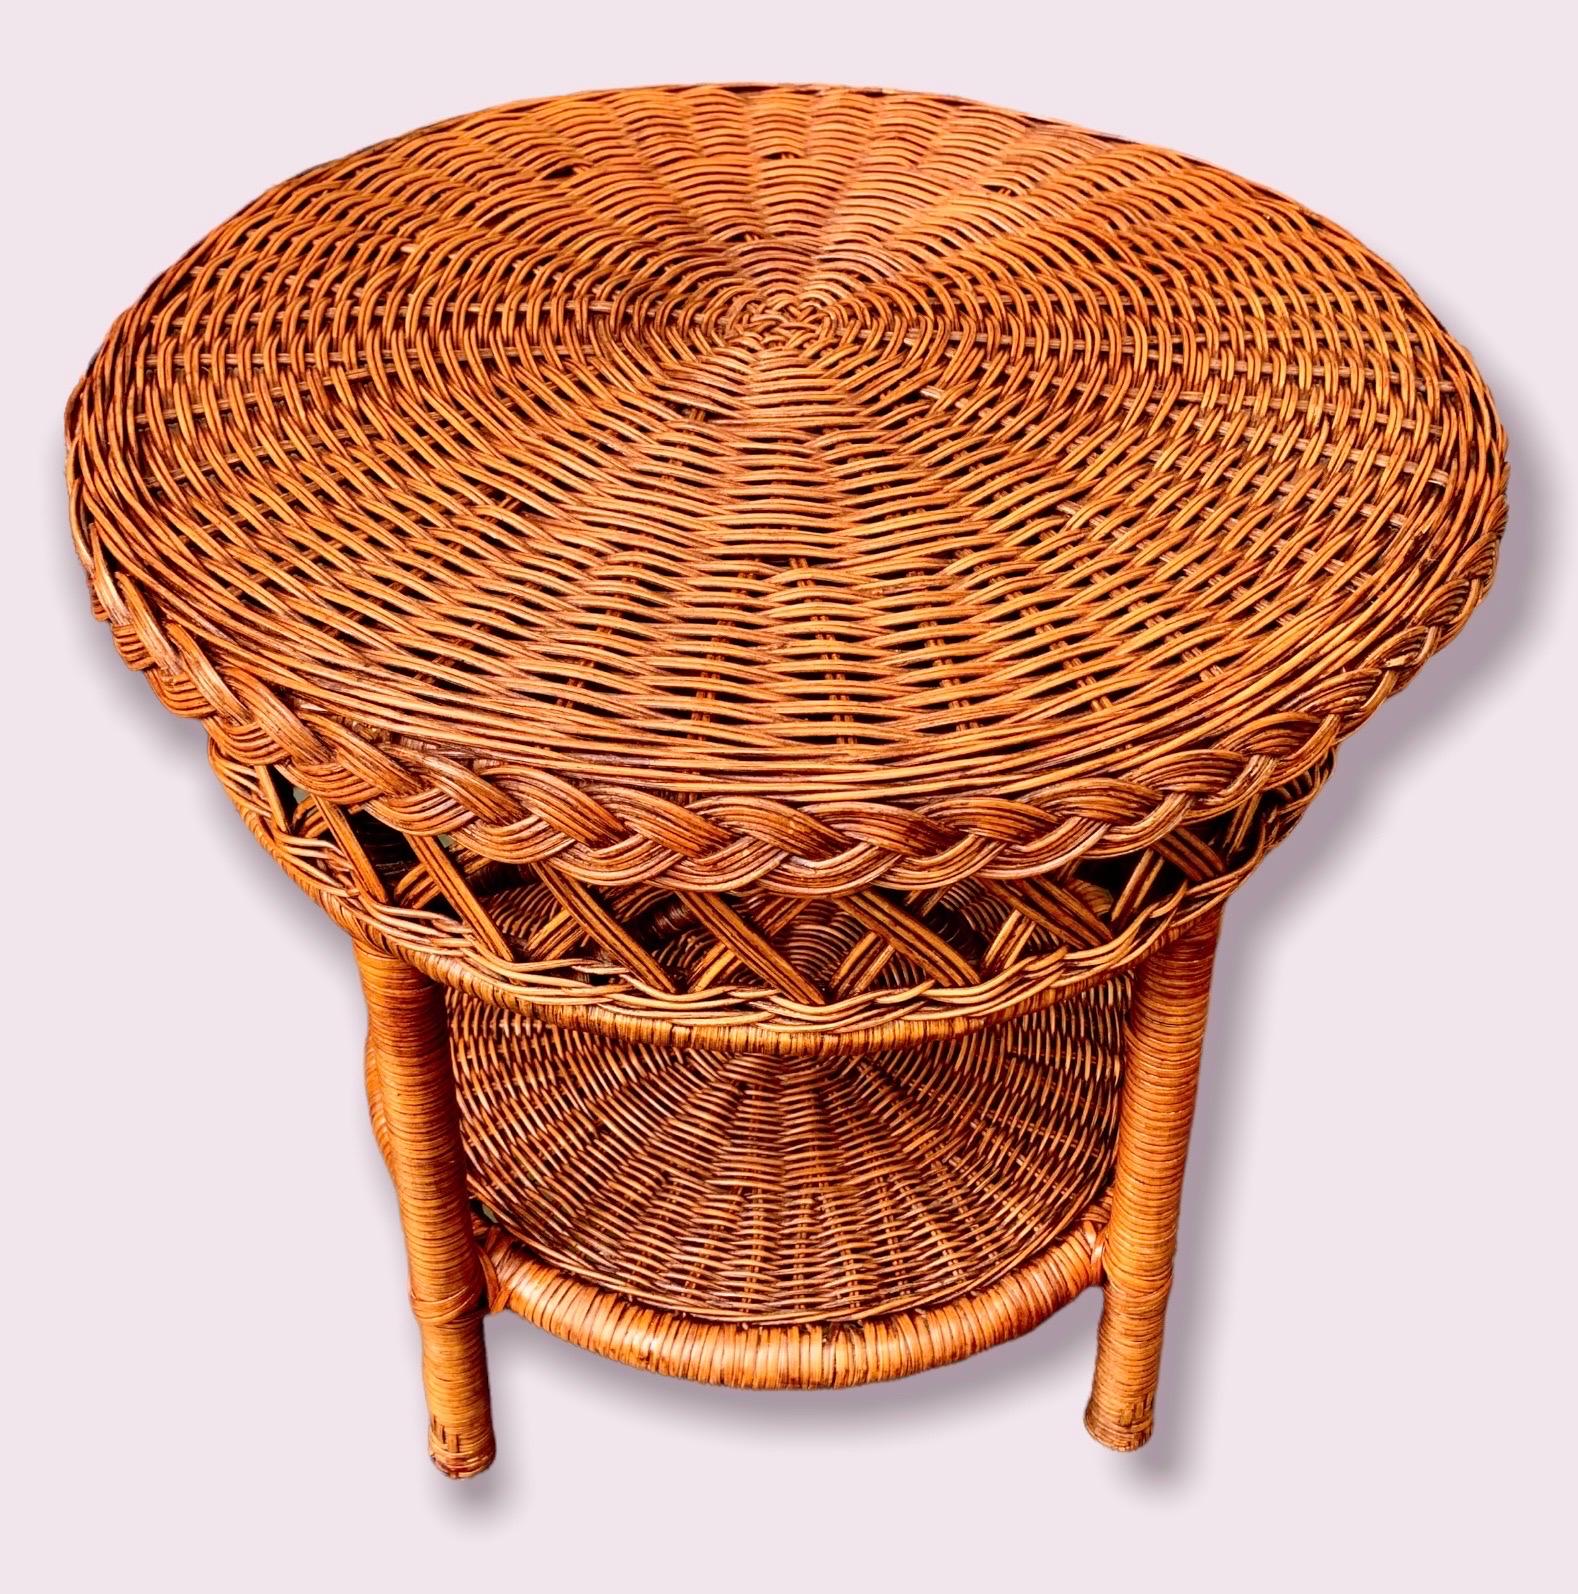 Bohemian Vintage Wicker over Rattan Rd. End/Side Table